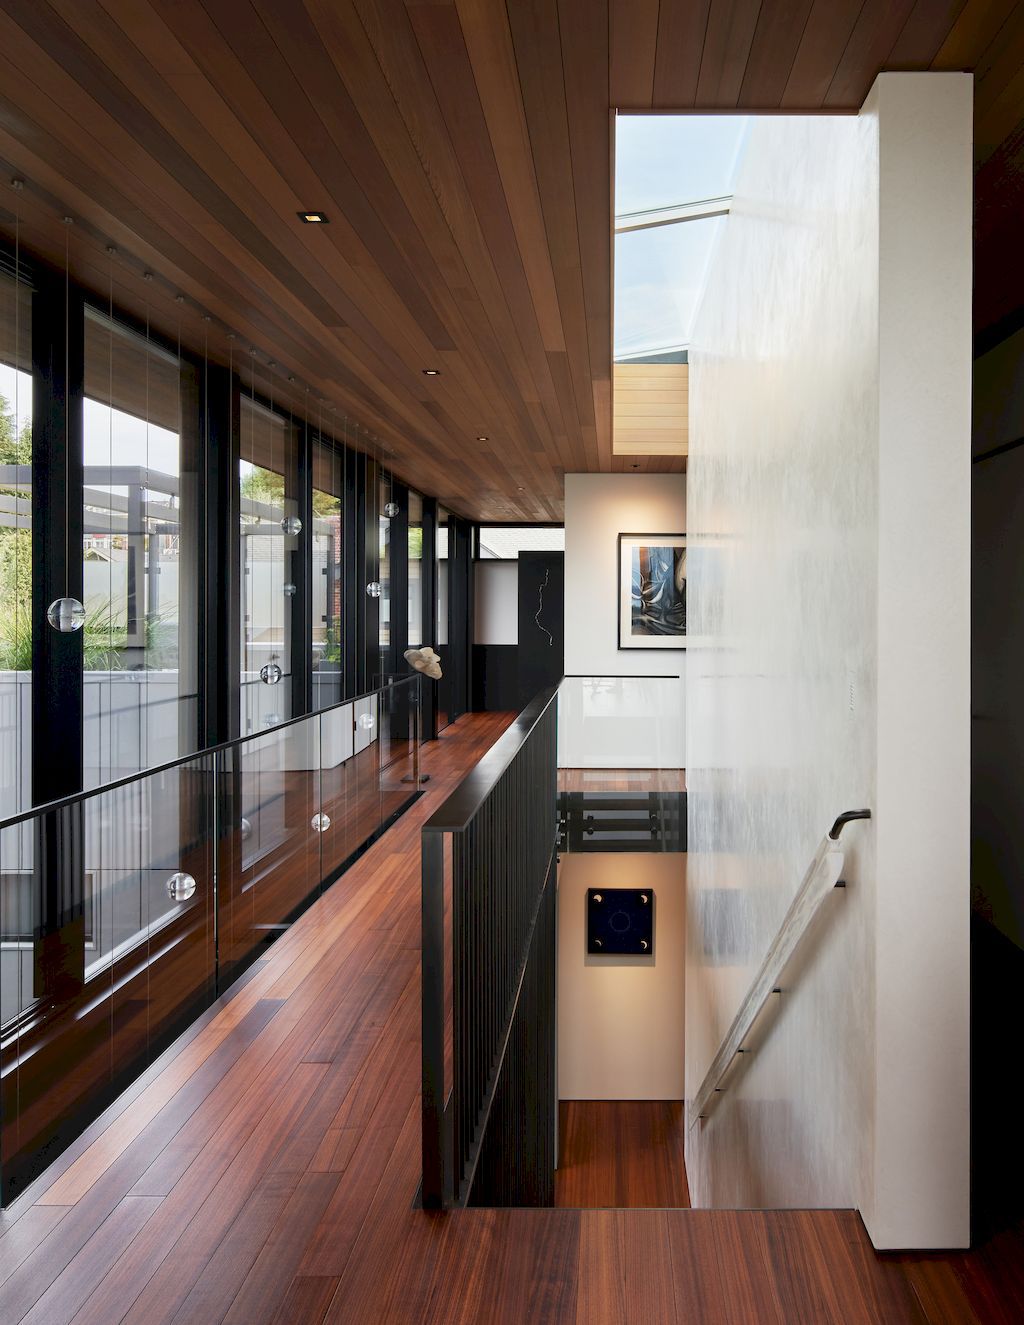 The Perch House with Verdant Courtyard in Seattle by Chadbourne + Doss